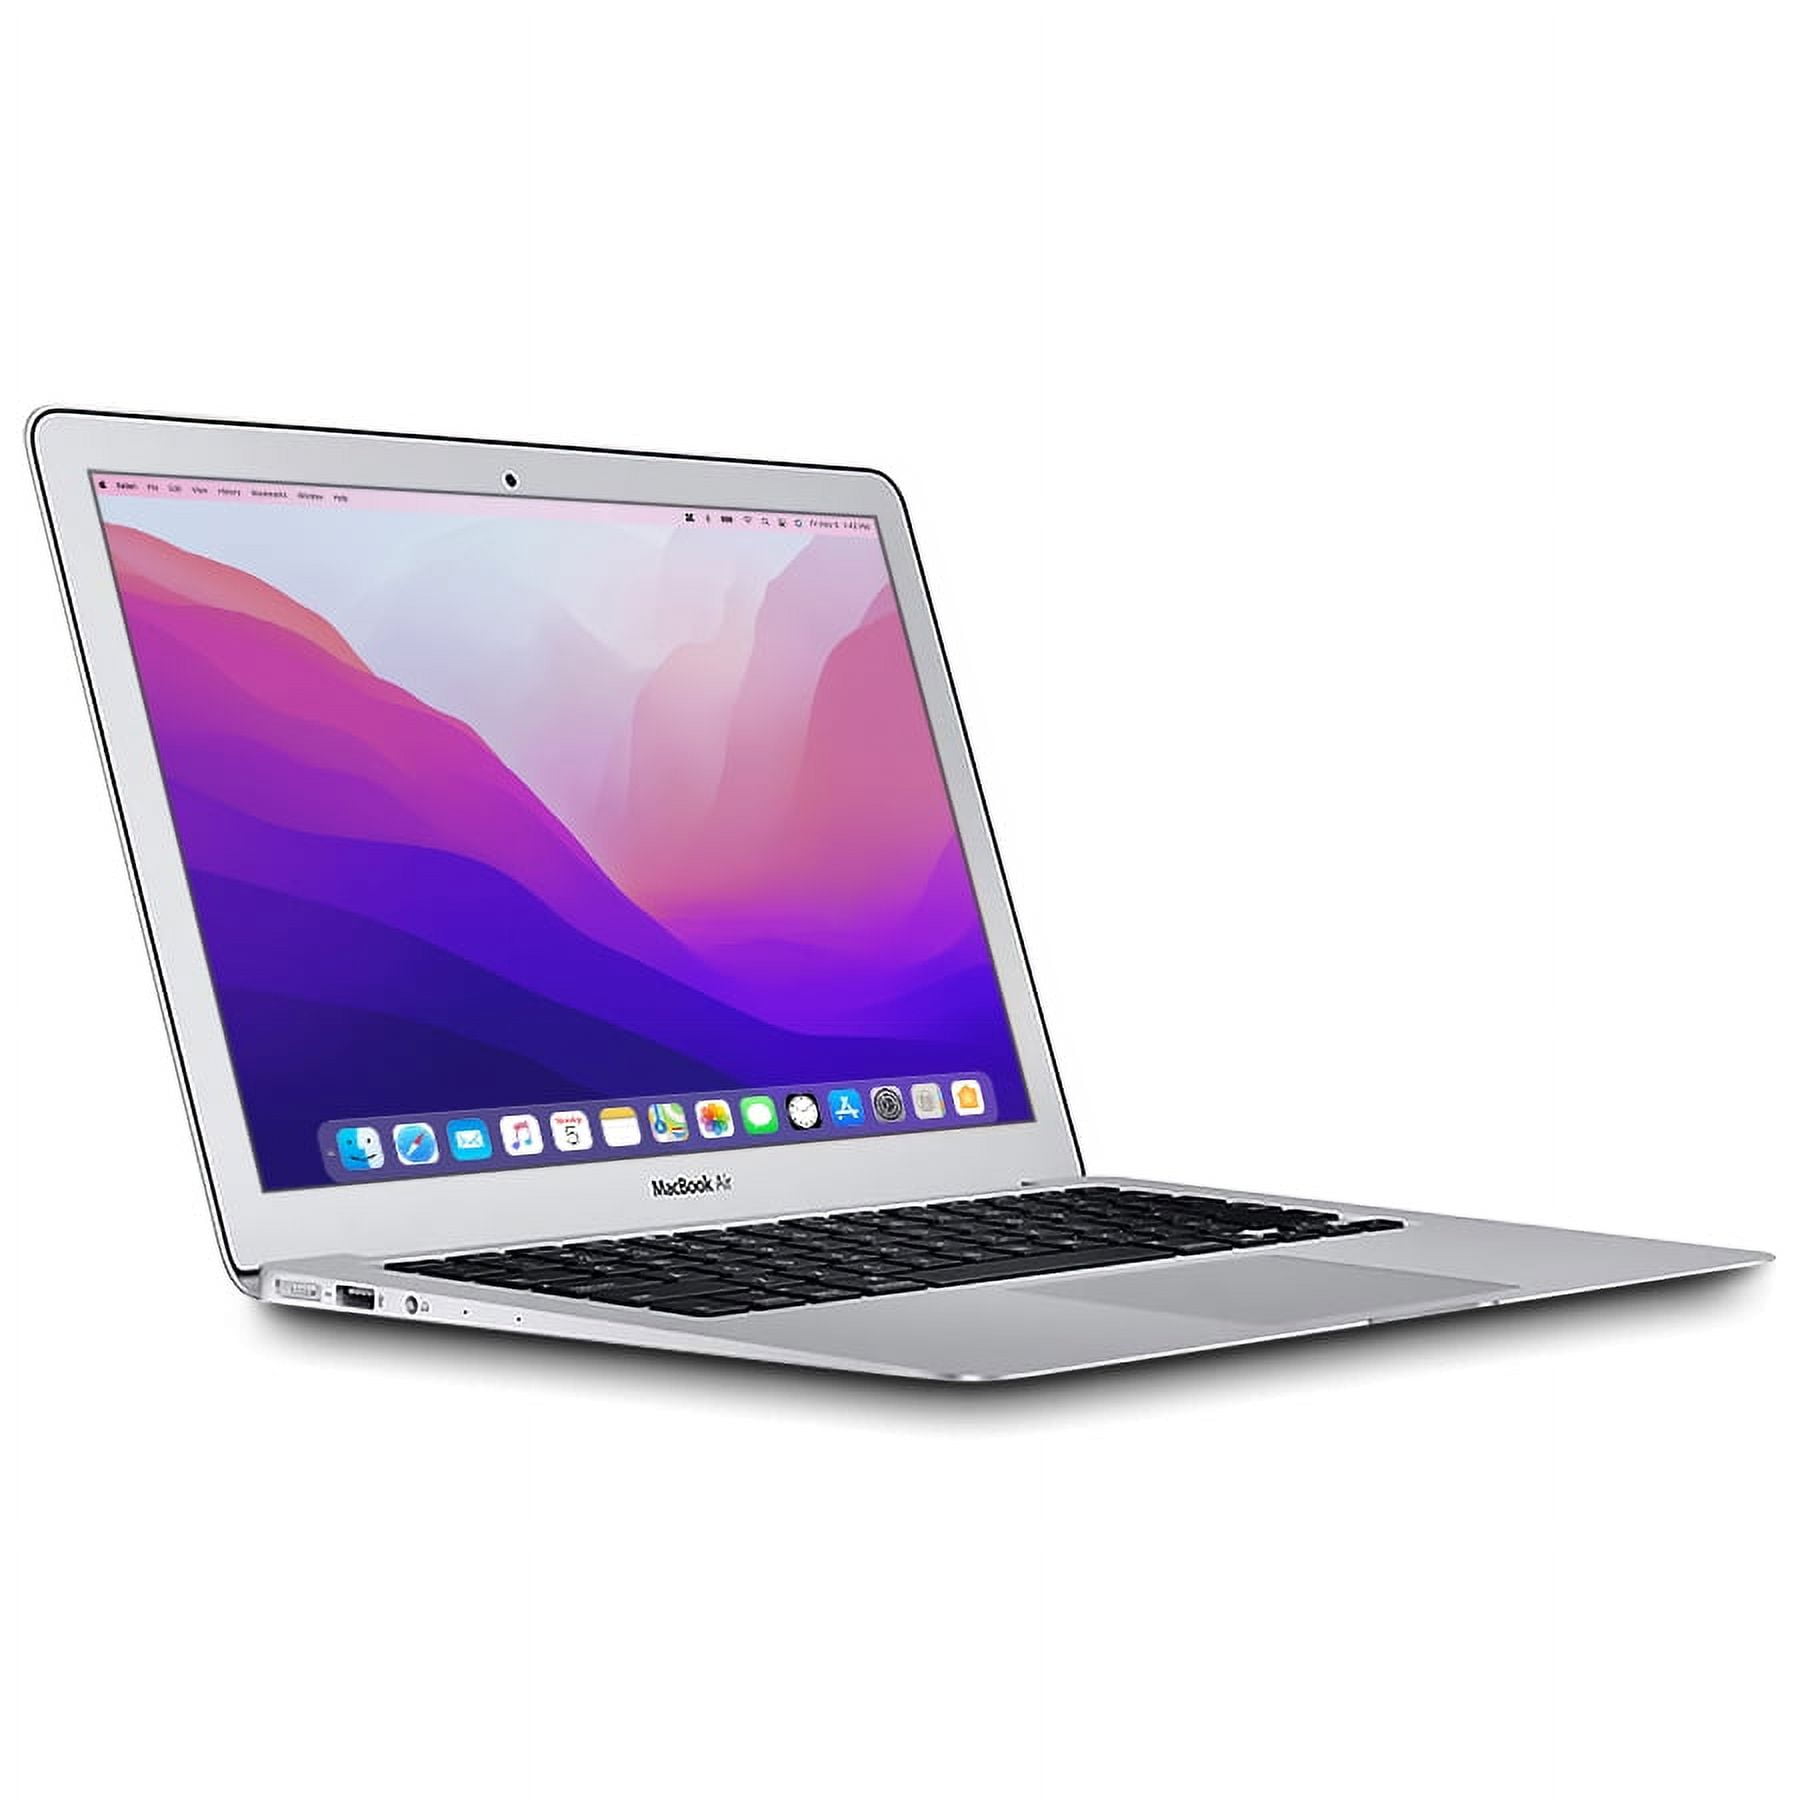 Achat reconditionné Apple MacBook Air CTO 13.3 (Glossy) 1.6 GHz Intel Core  i5 4 GB RAM 512 GB PCIe SSD [Early 2015]